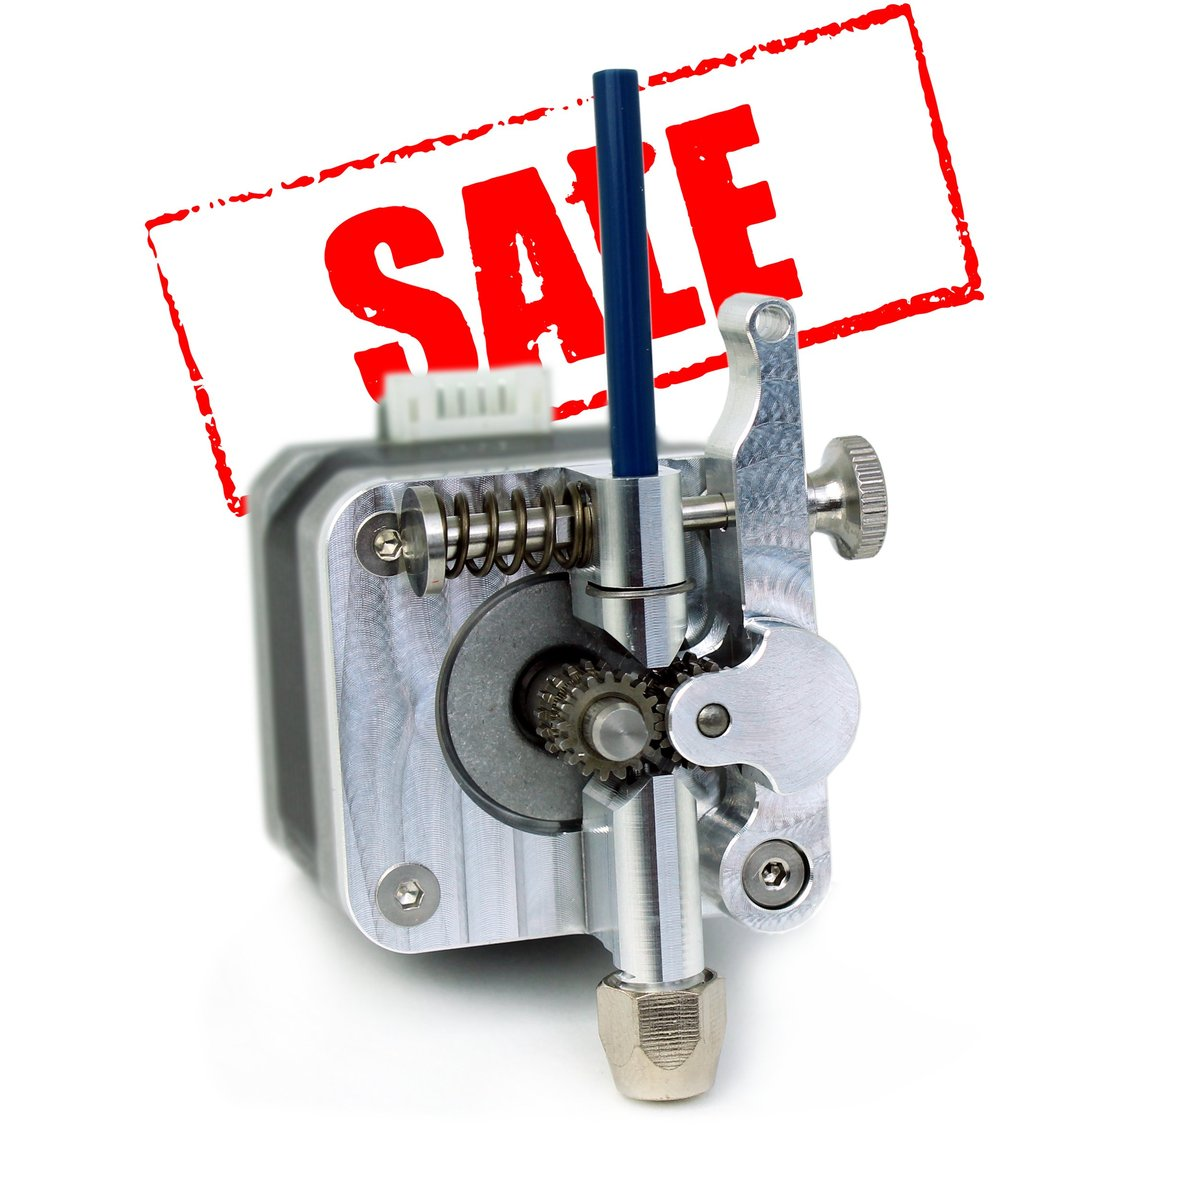 Extruder Kits and standalone extruders for 3d printers— Micro Swiss Online Store 25% off